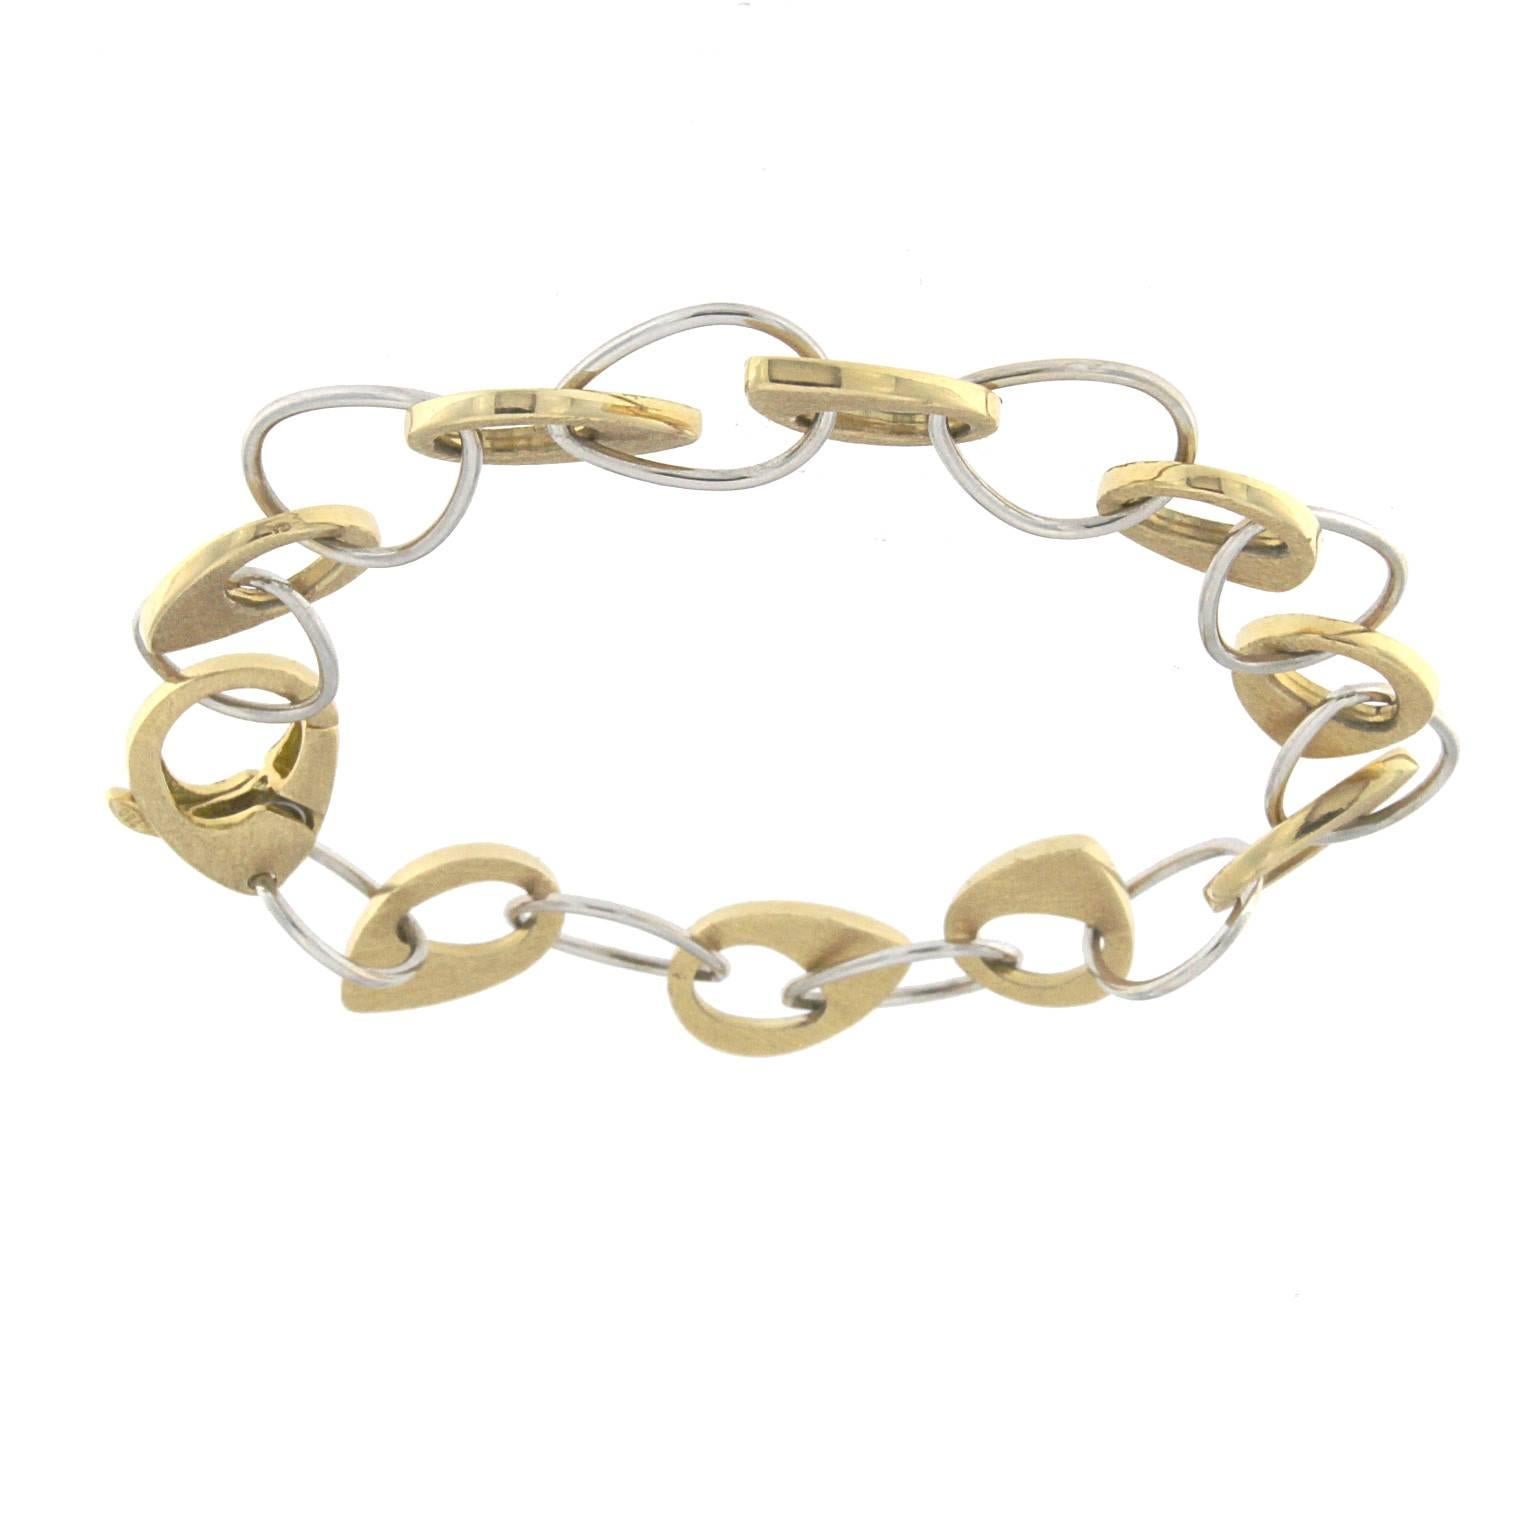 Unusual design chain bracelet with great visual effect in Yellow gold with white and yellow satin elements links.
Total weight of  gold 18 kt gr 14.90
Stamp 750

